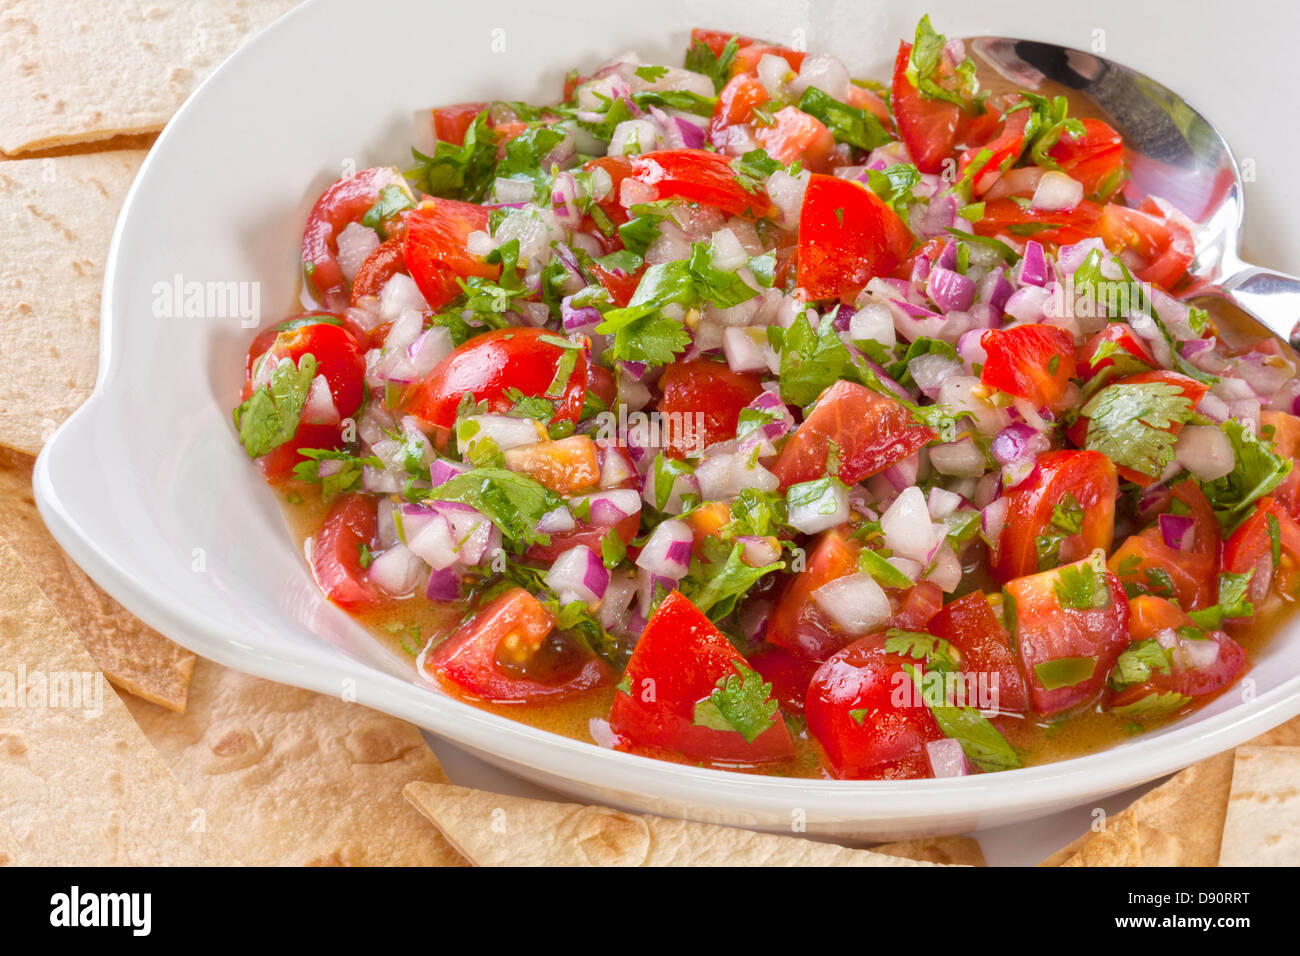 Pico de gallo, or salsa fresca, is a fresh, uncooked relish in Mexican cuisine, made from tomatoes, red onion, Stock Photo